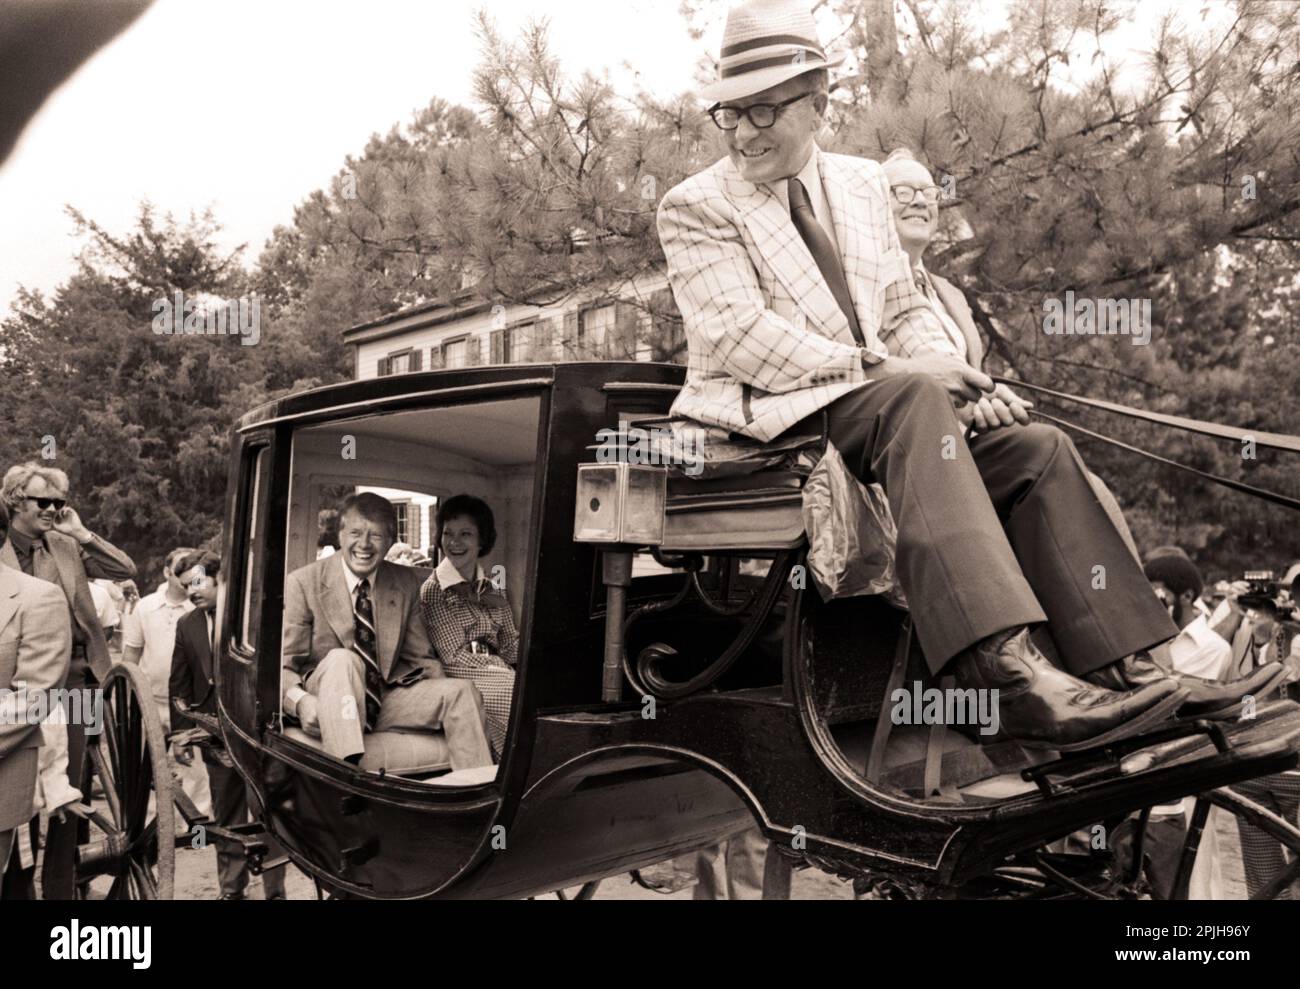 On the occasion of the US Bicentennial on July 4, 1976, candidate Jimmy Carter; his wife, Rosalynn; and daughter, Amy, ridein an 1850s carriage in Westville, Georgia, before speaking in front of a crowd of well-wishers. Stock Photo